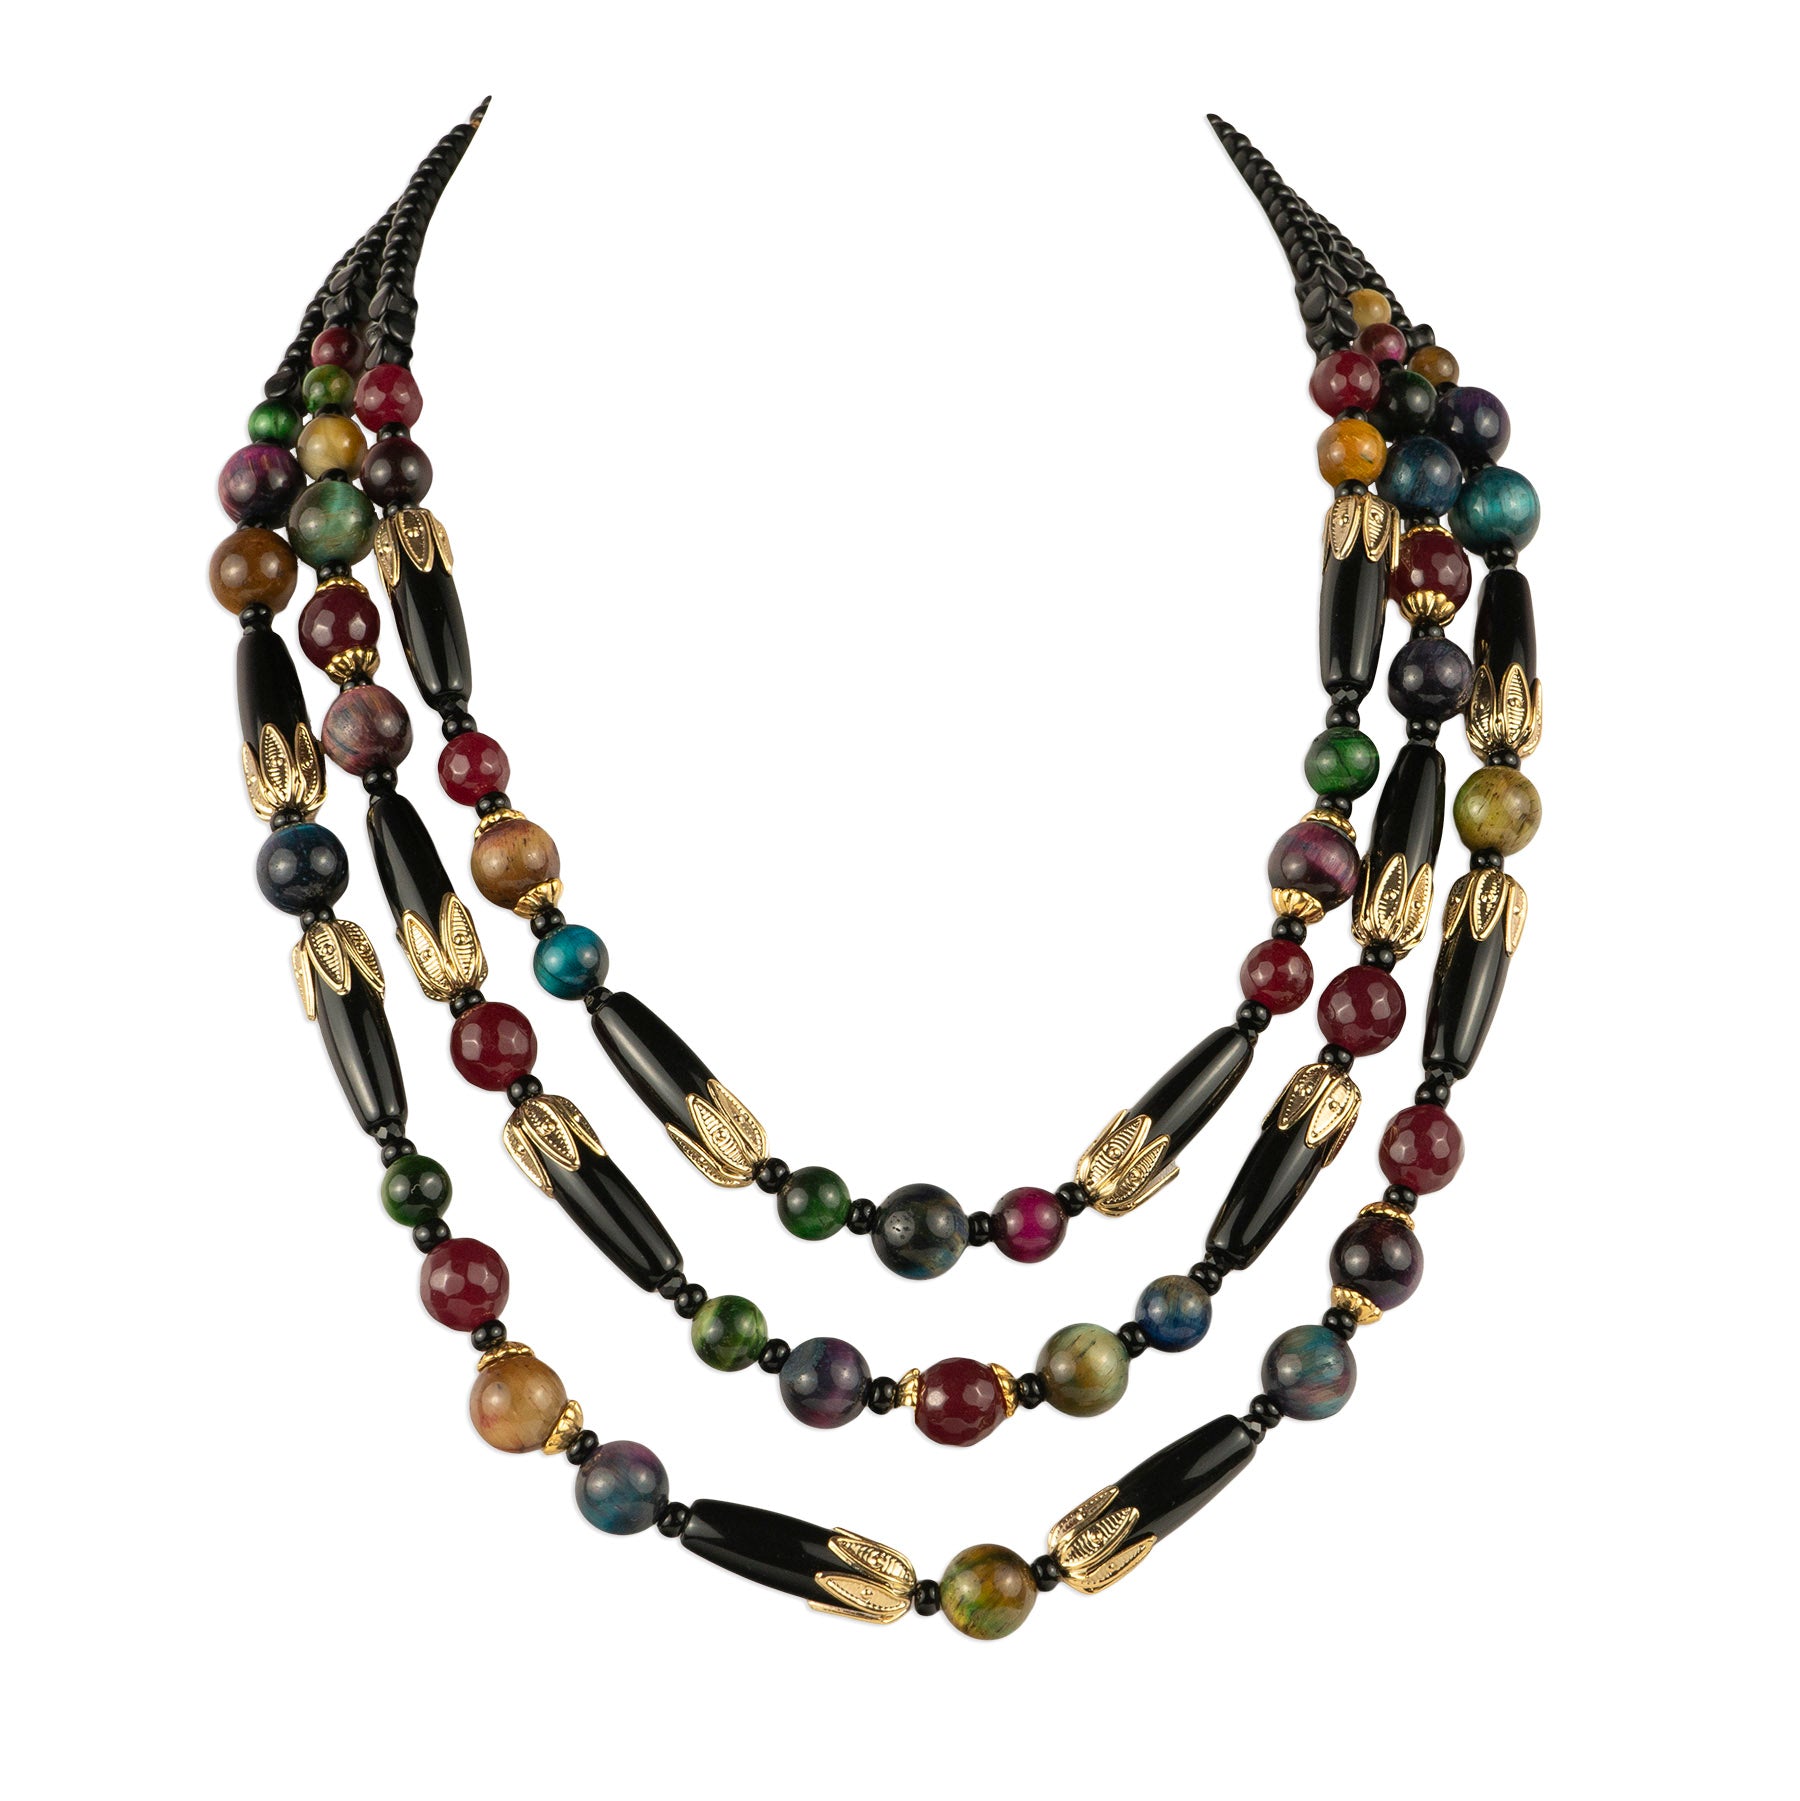 Three-strand necklace with semiprecious stones and resin